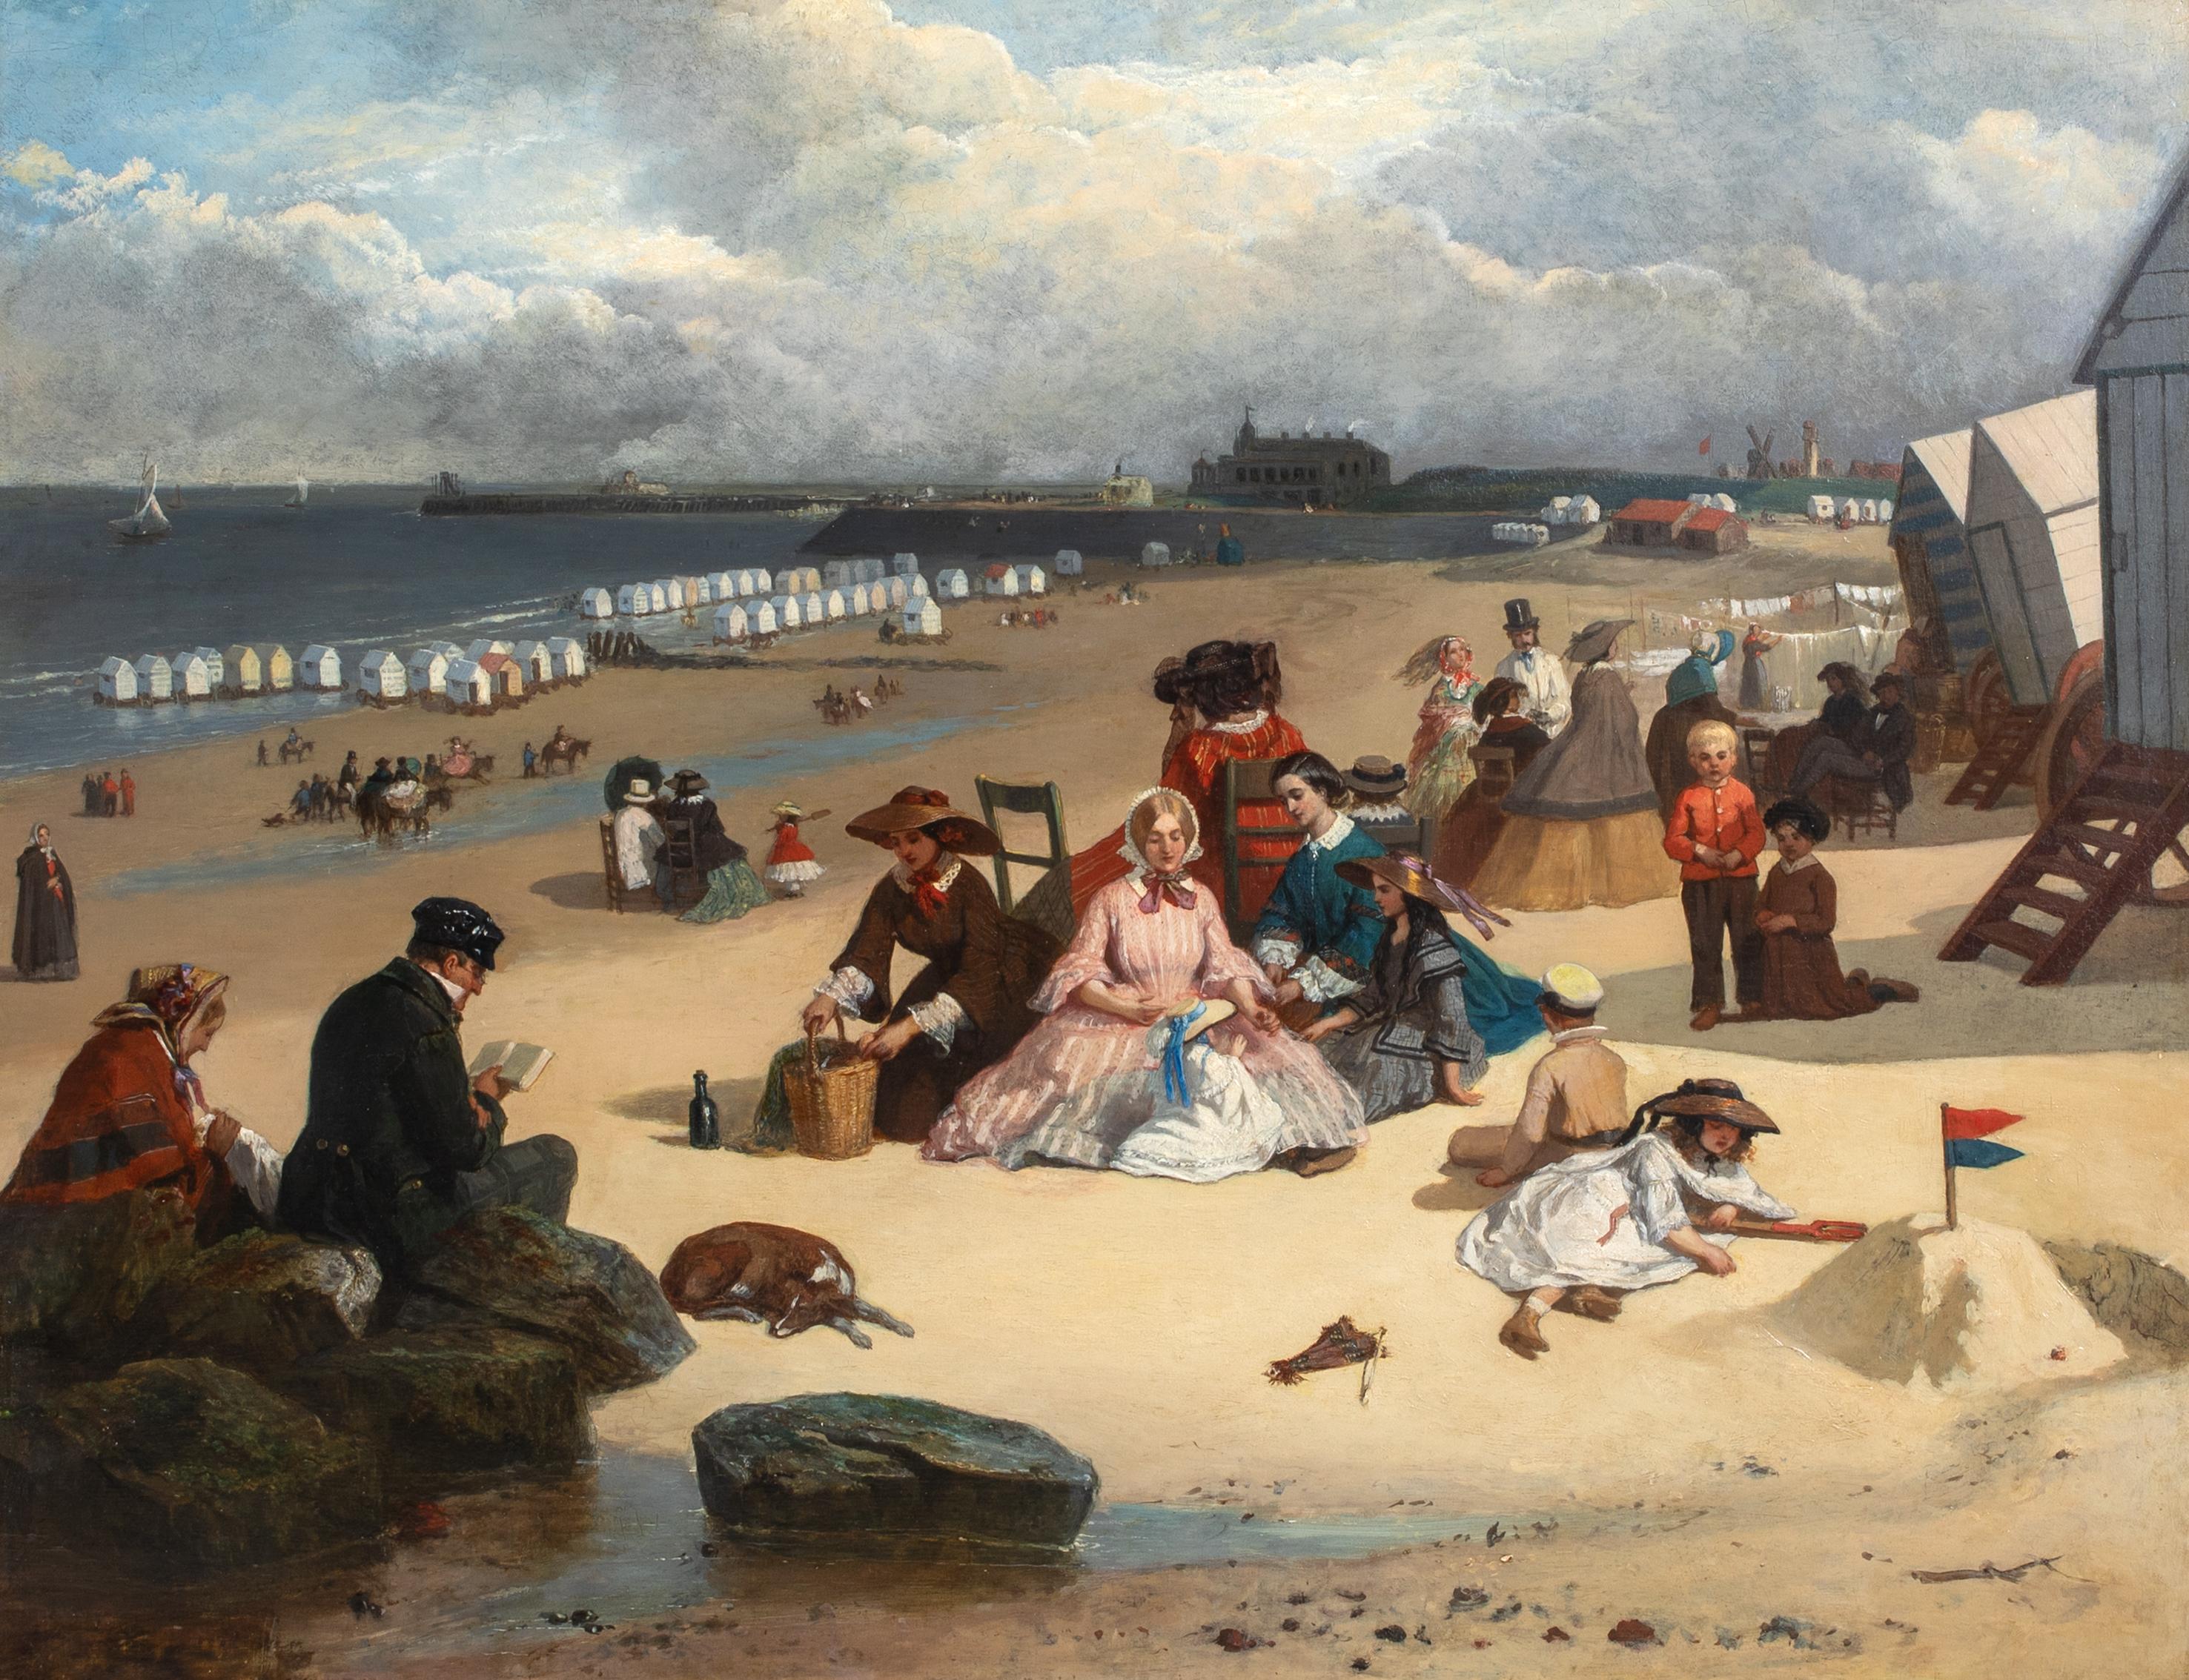 Beach Scene, Littlehampton, West Sussex, 19th Century

by JOHN EYRES (1857-1889) to $12,000 - Royal Academy Painter

Large 19th century view of families at Littlehampton, oil on panel by John W Eyres. Excellent quality and condition of the Royal